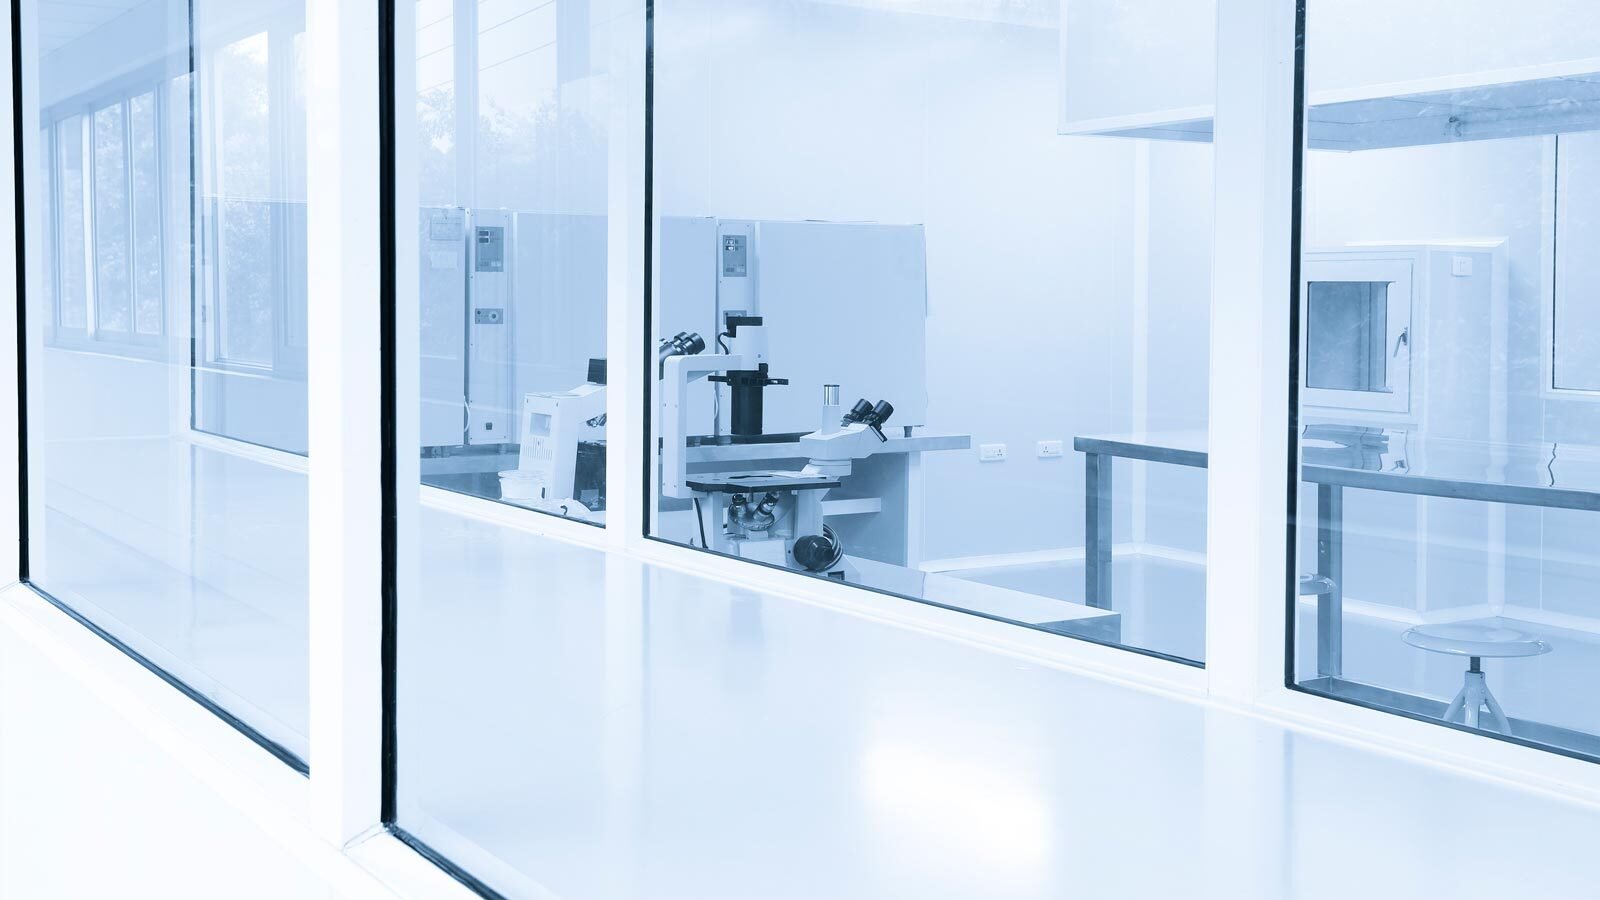 A white cleanroom with glassdoors